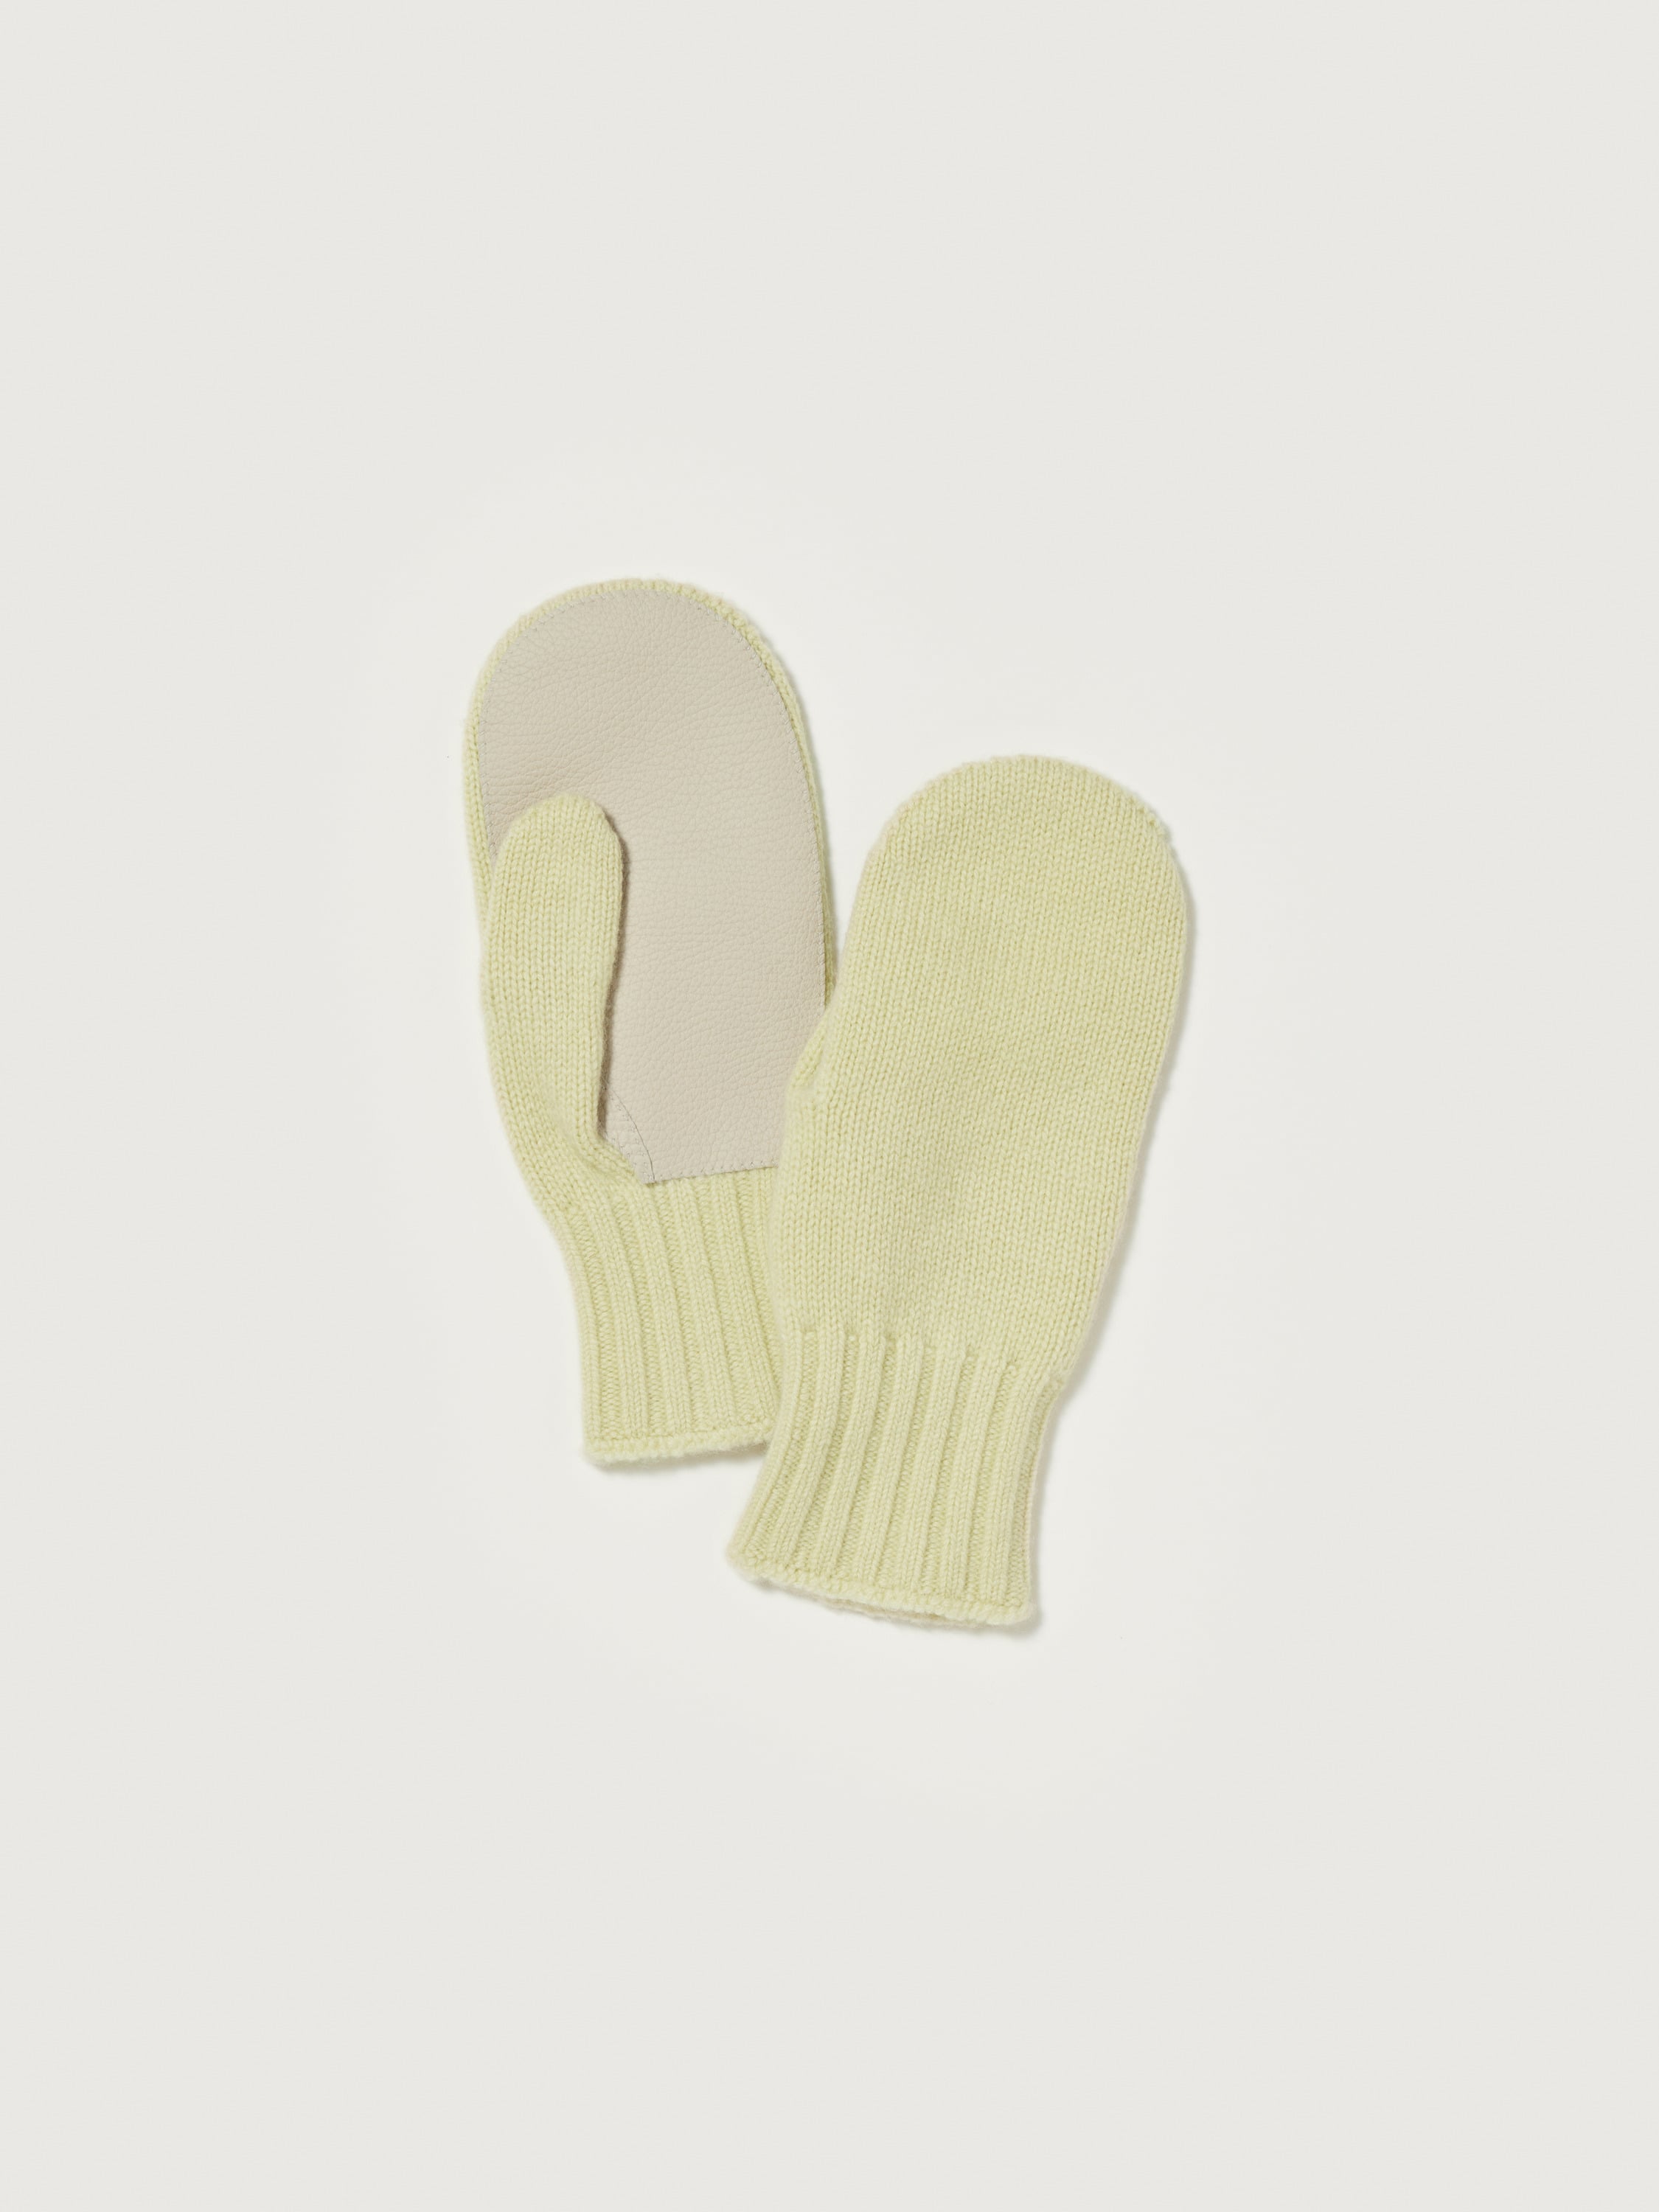 BABY CASHMERE KNIT LEATHER GLOVES 詳細画像 TOP LIGHT YELLOW 1